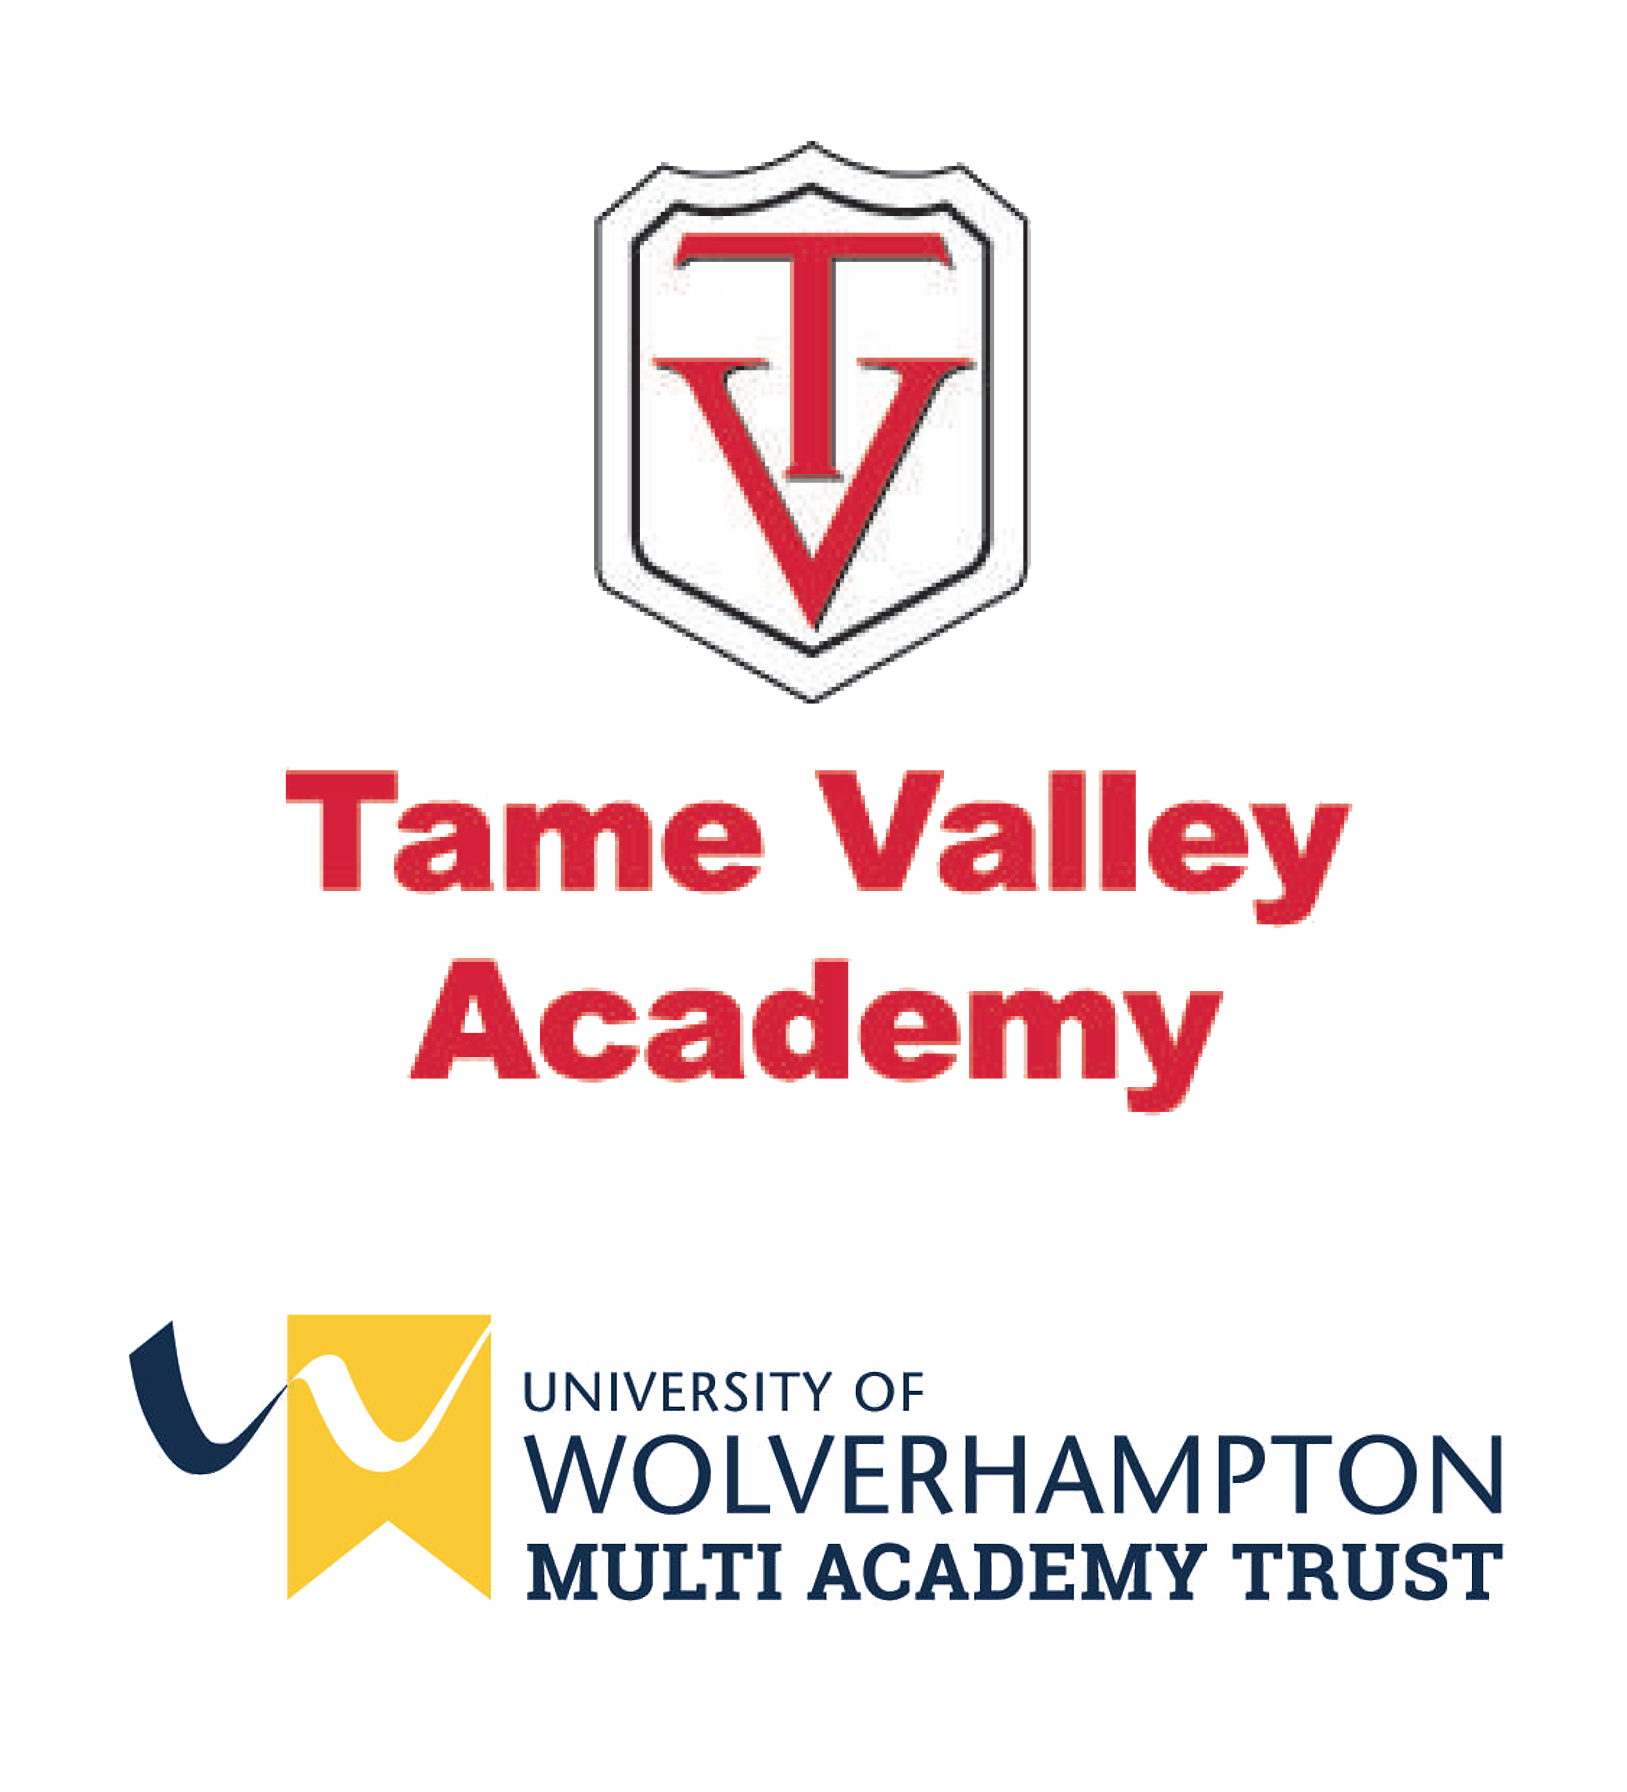 Tame Valley Academy